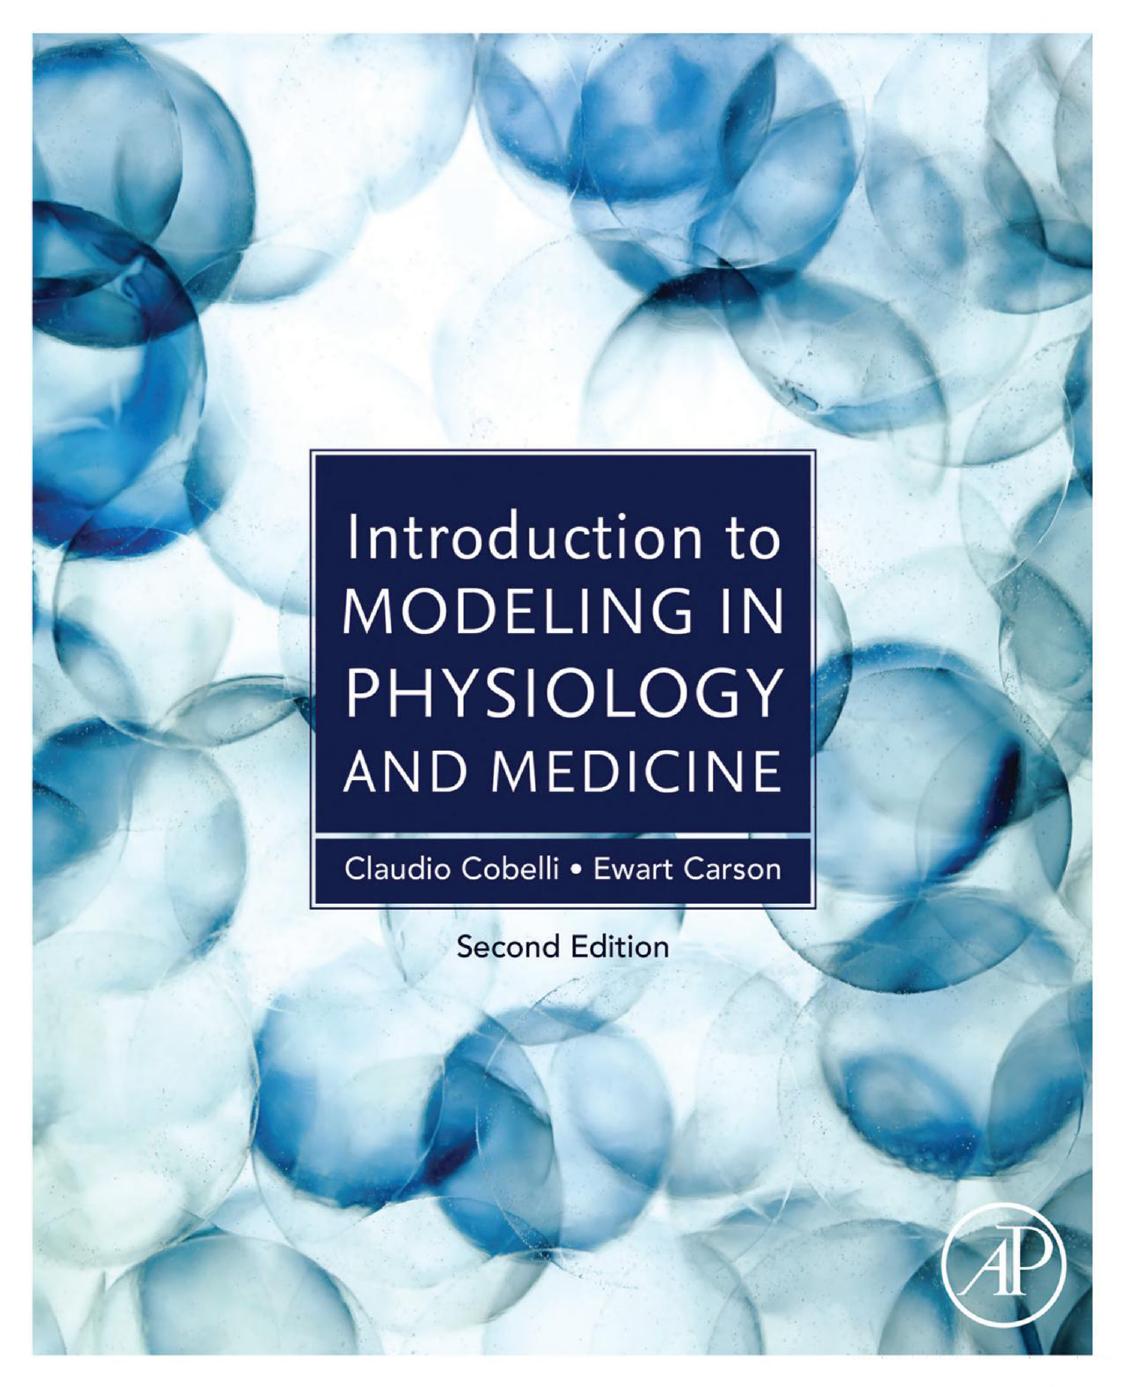 Introduction to Modeling in Physiology and Medicine, 2e